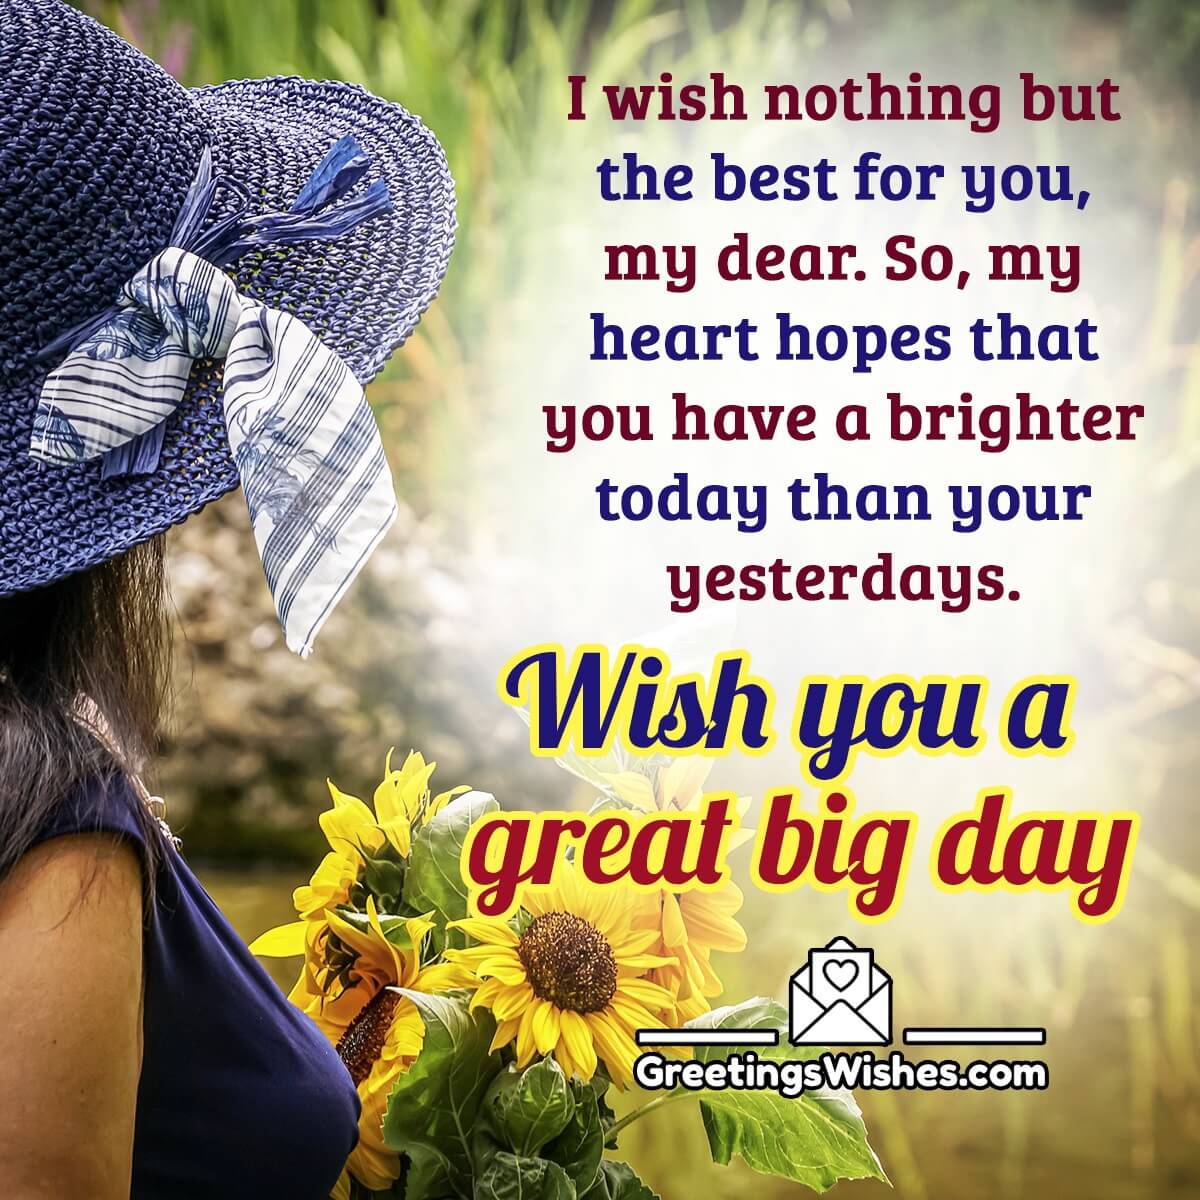 Have A Great Day Wishes - Greetings Wishes